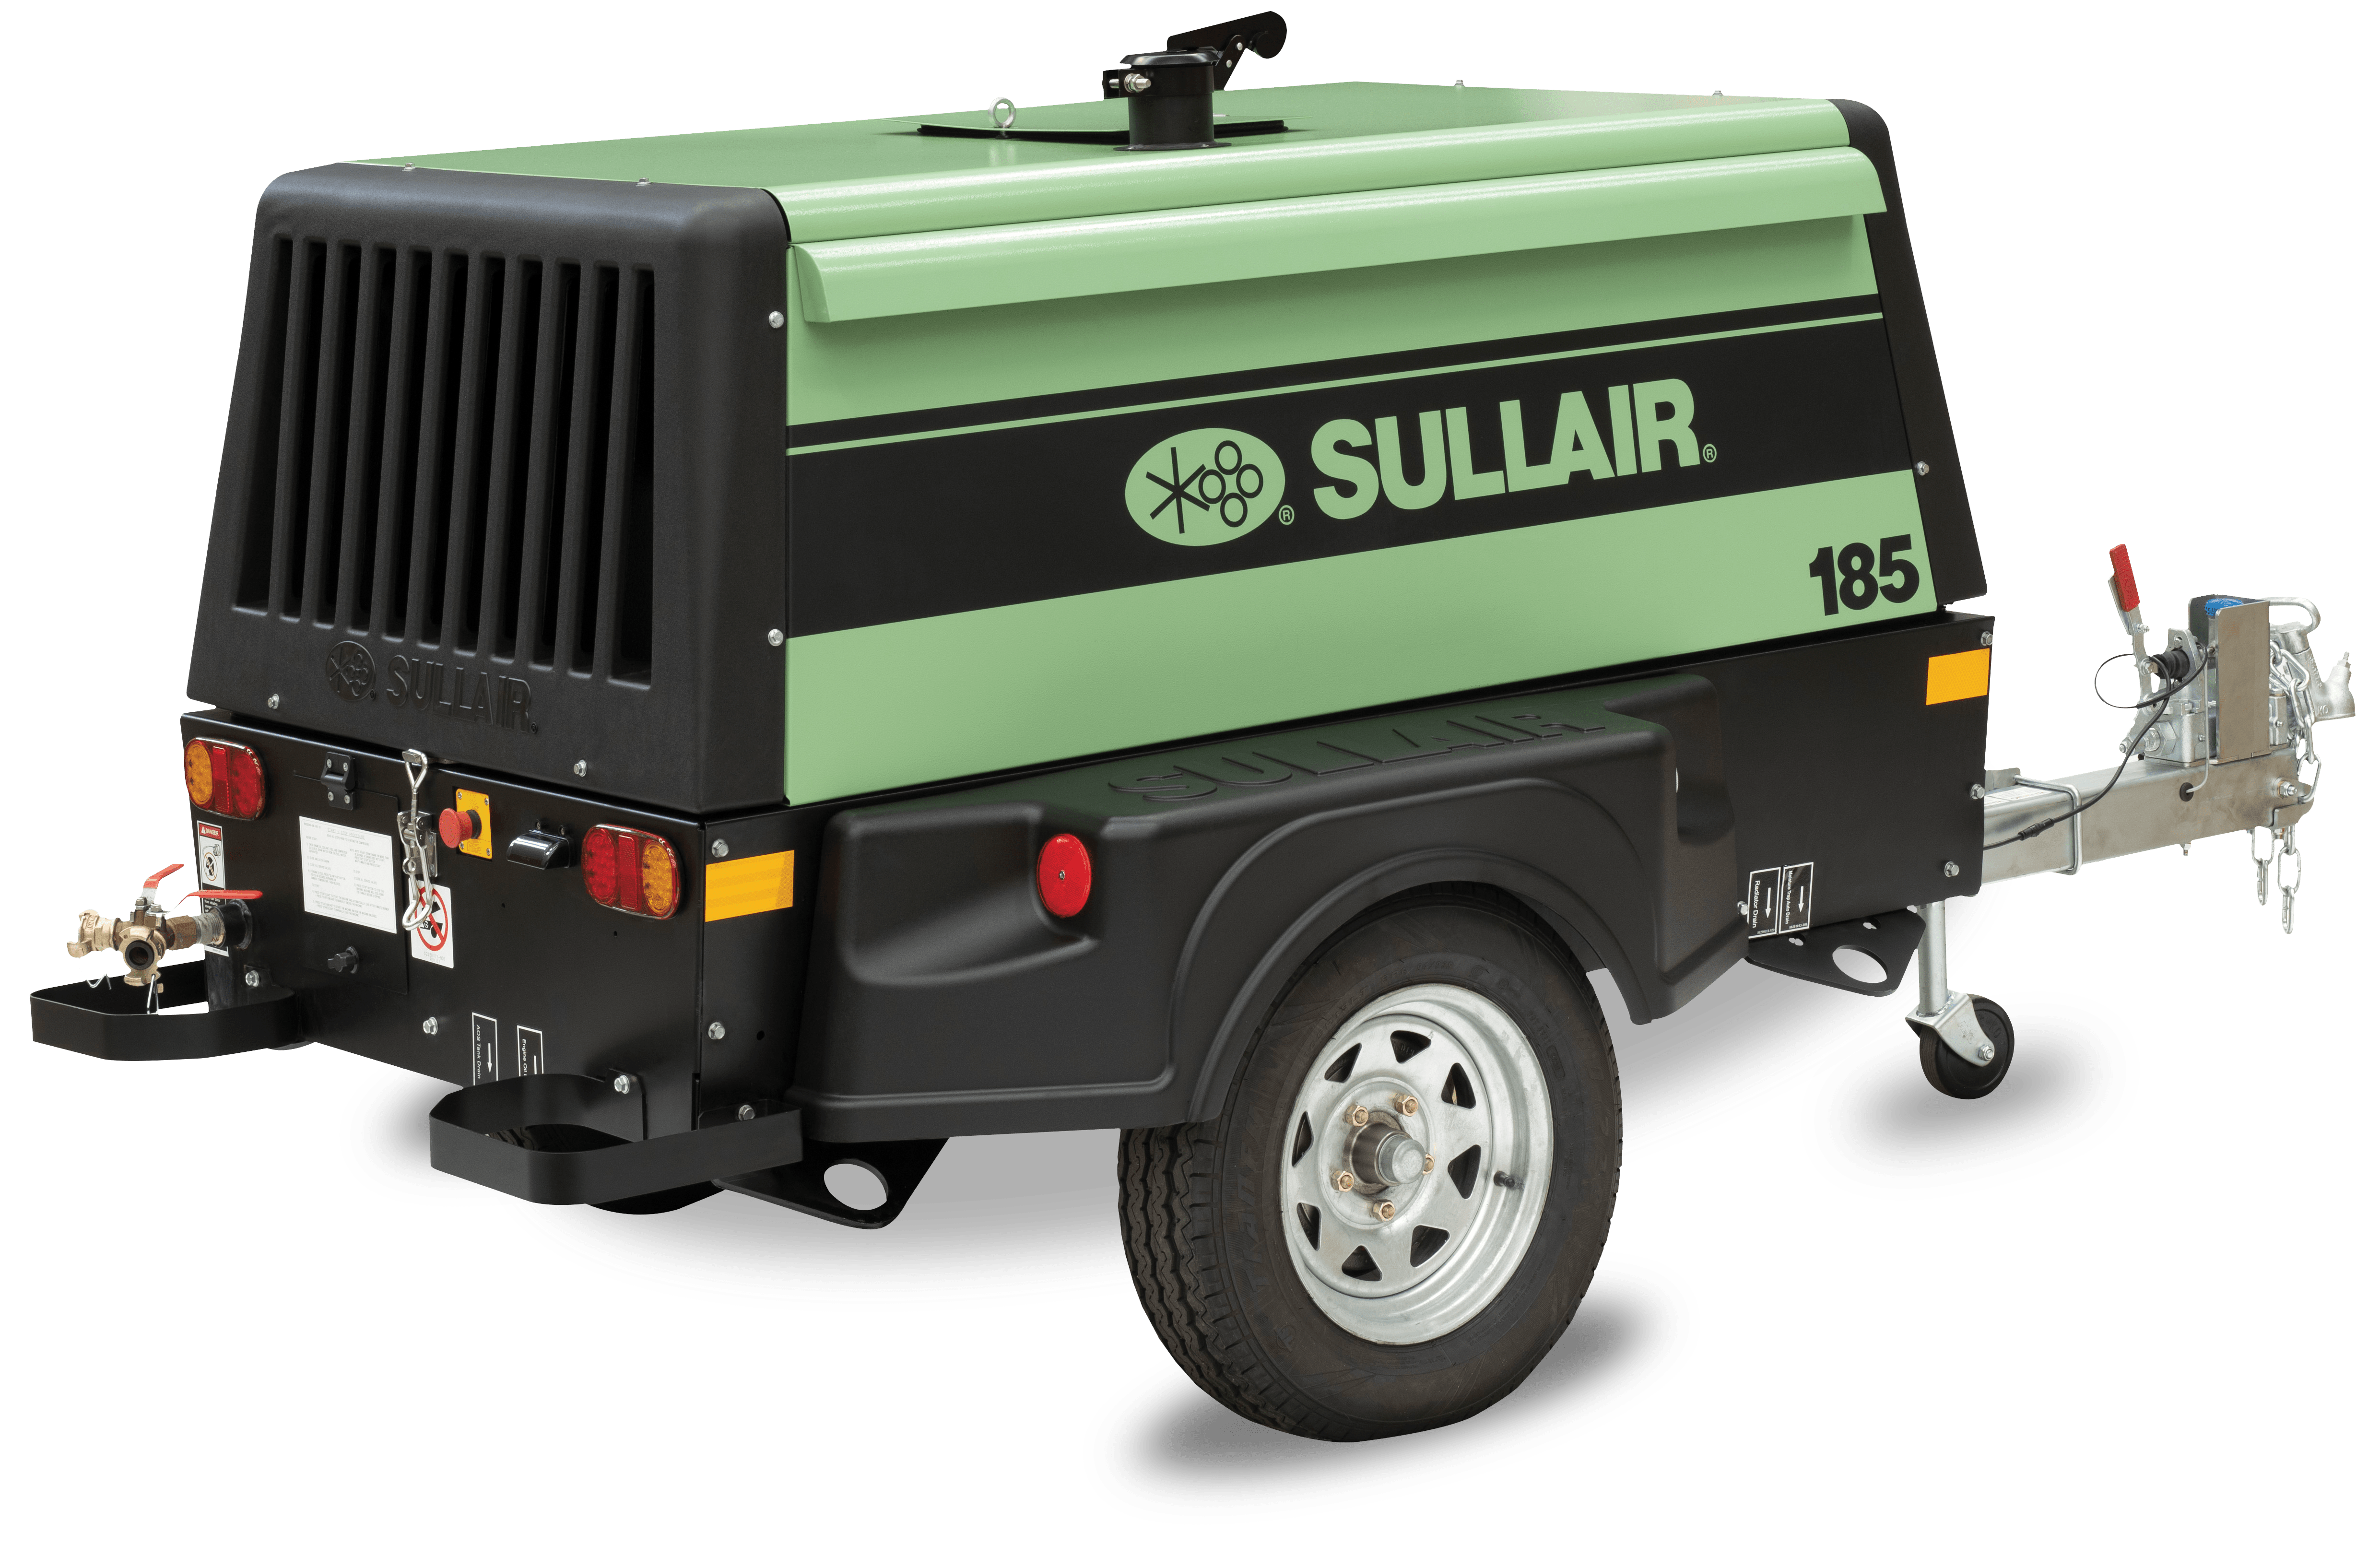 Sullair’s new and improved 185A